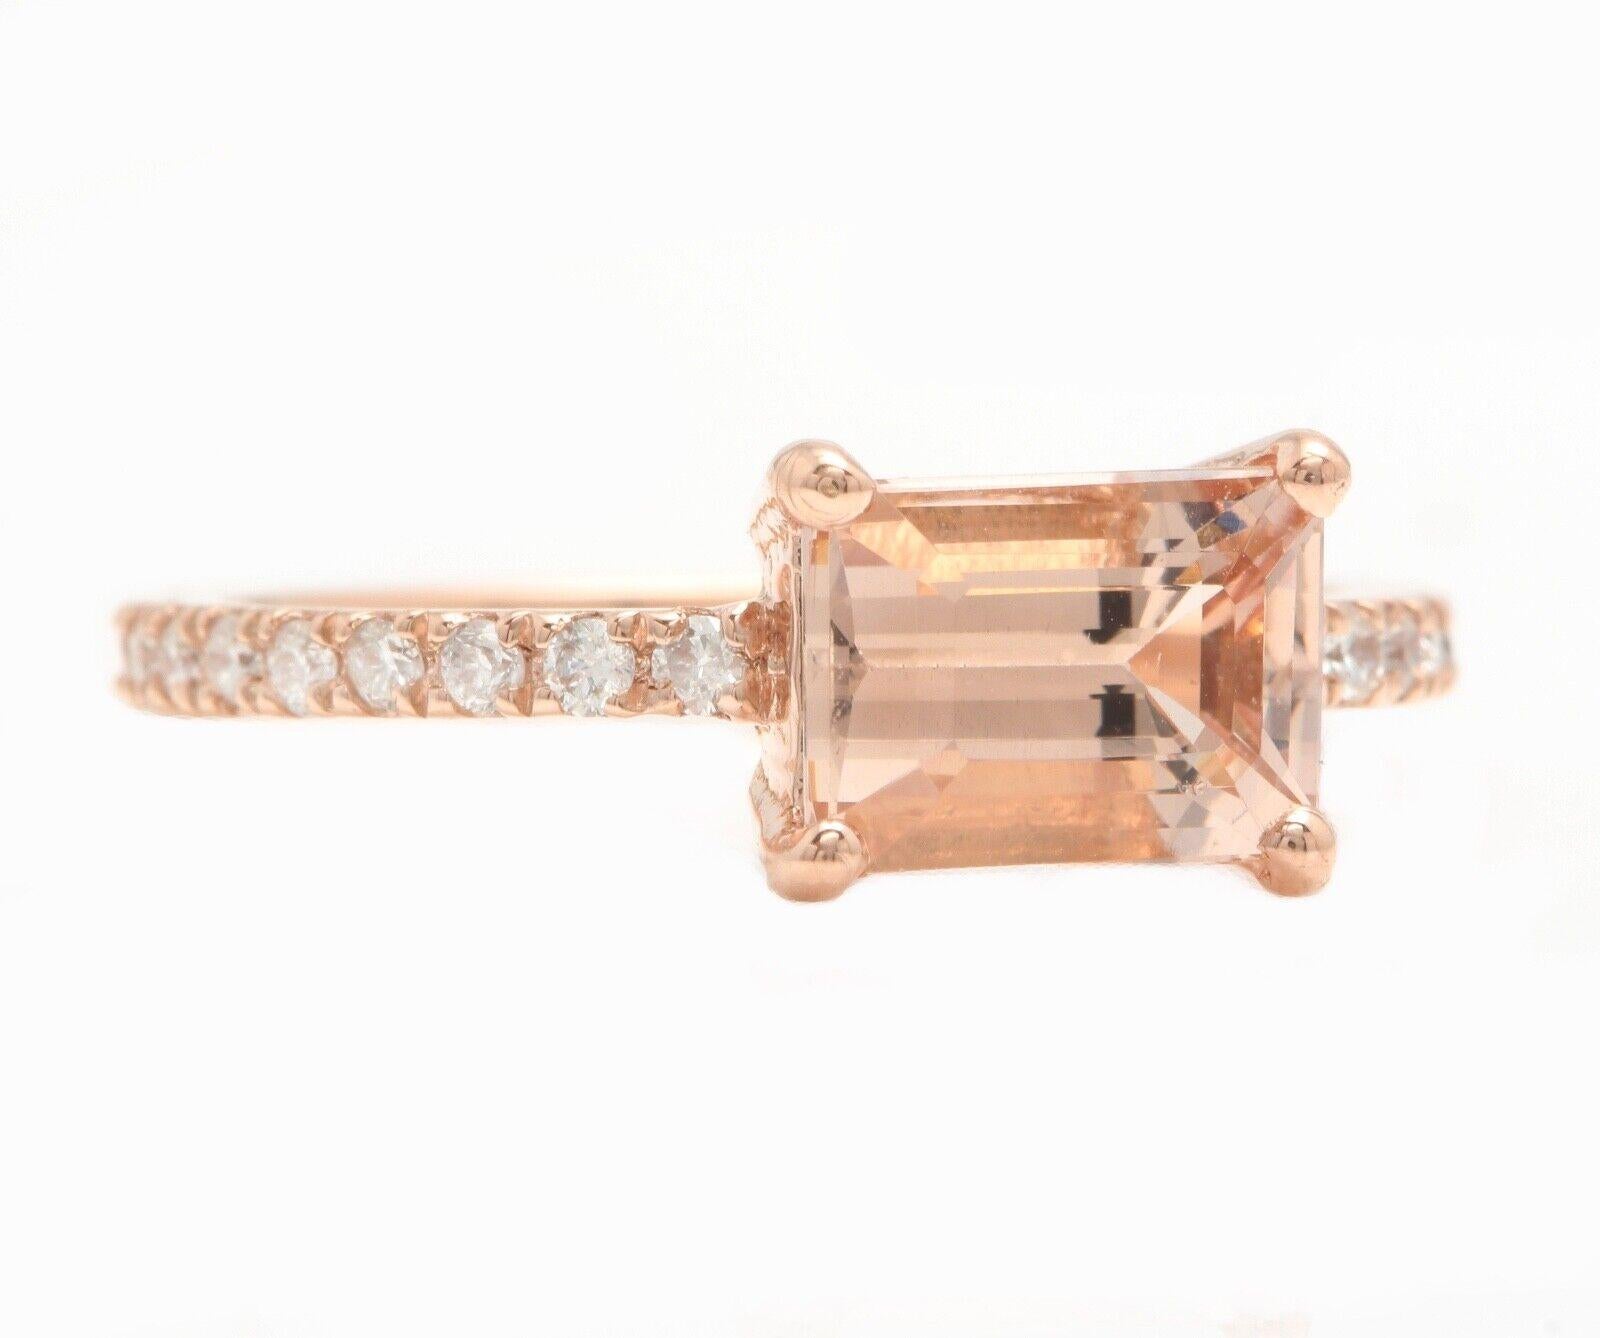 2.00 Carats Natural Morganite and Diamond 14K Solid Rose Gold Ring

Suggested Replacement Value: Approx. $3,000.00

Total Morganite Weight is: Approx. 1.70 Carats

Morganite Treatment: Heating

Morganite Measures: Approx. 8.00 x 6.00mm

Natural